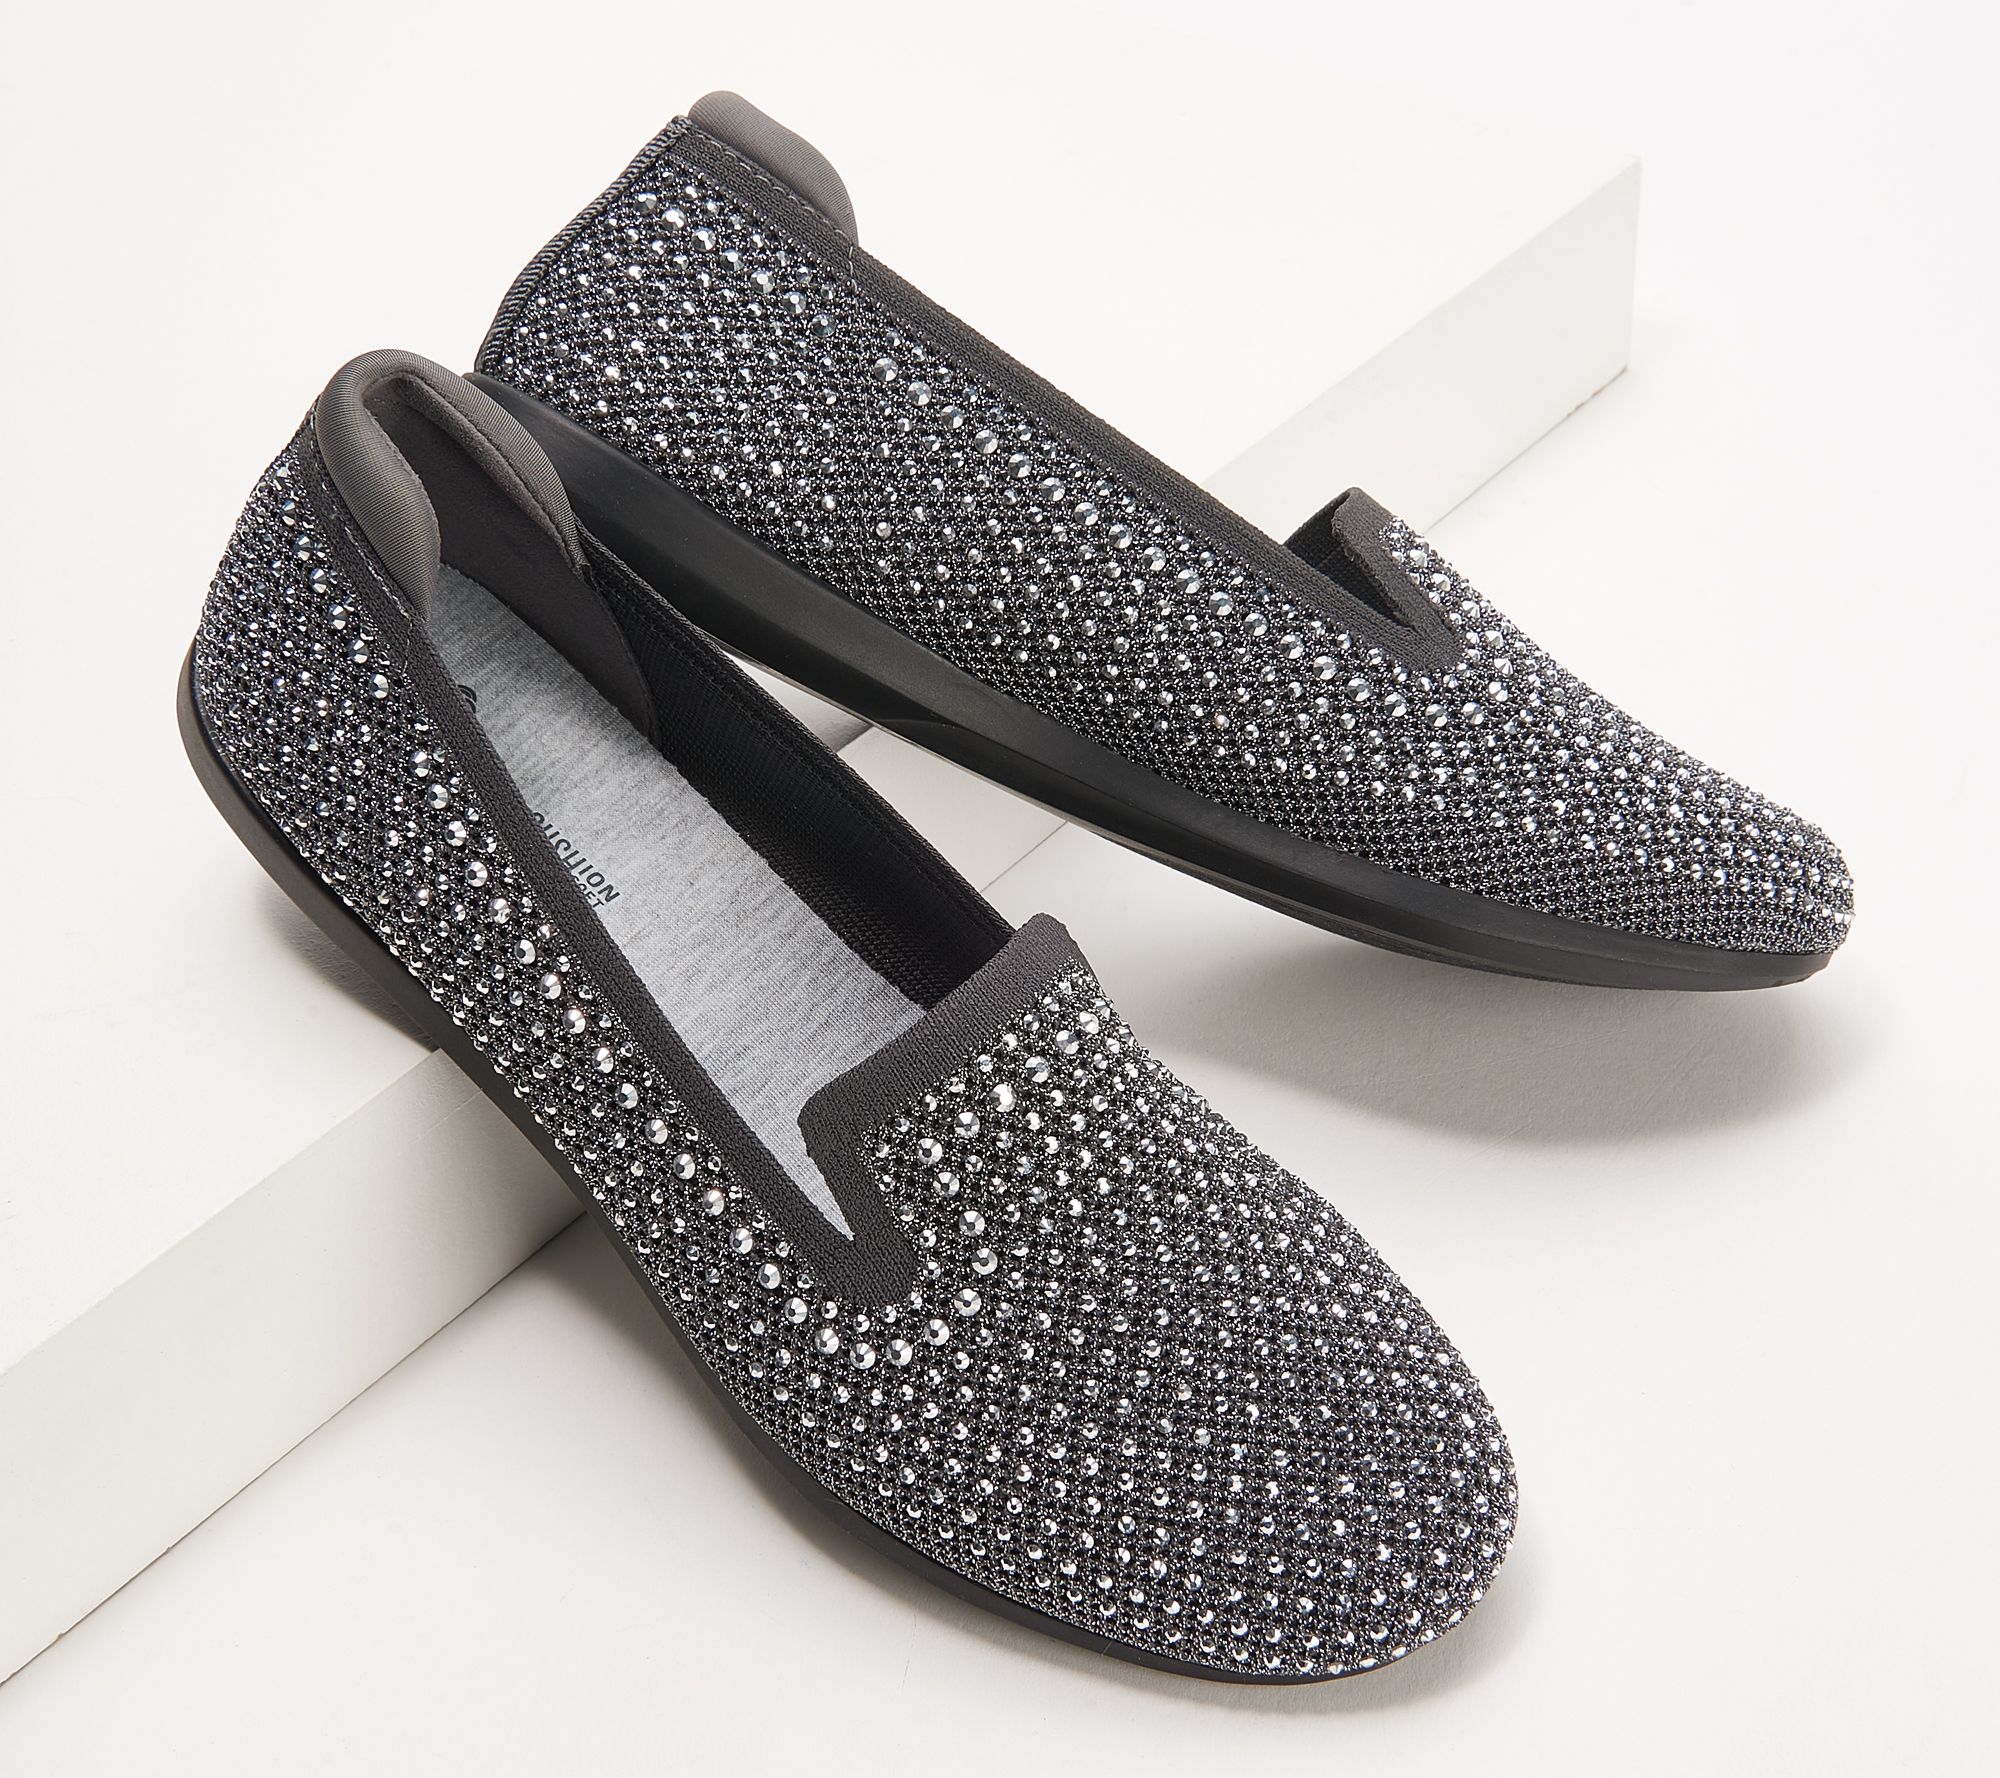 Clarks Cloudsteppers Embellished Loafers - Carly Dream Sparkle - QVC.com